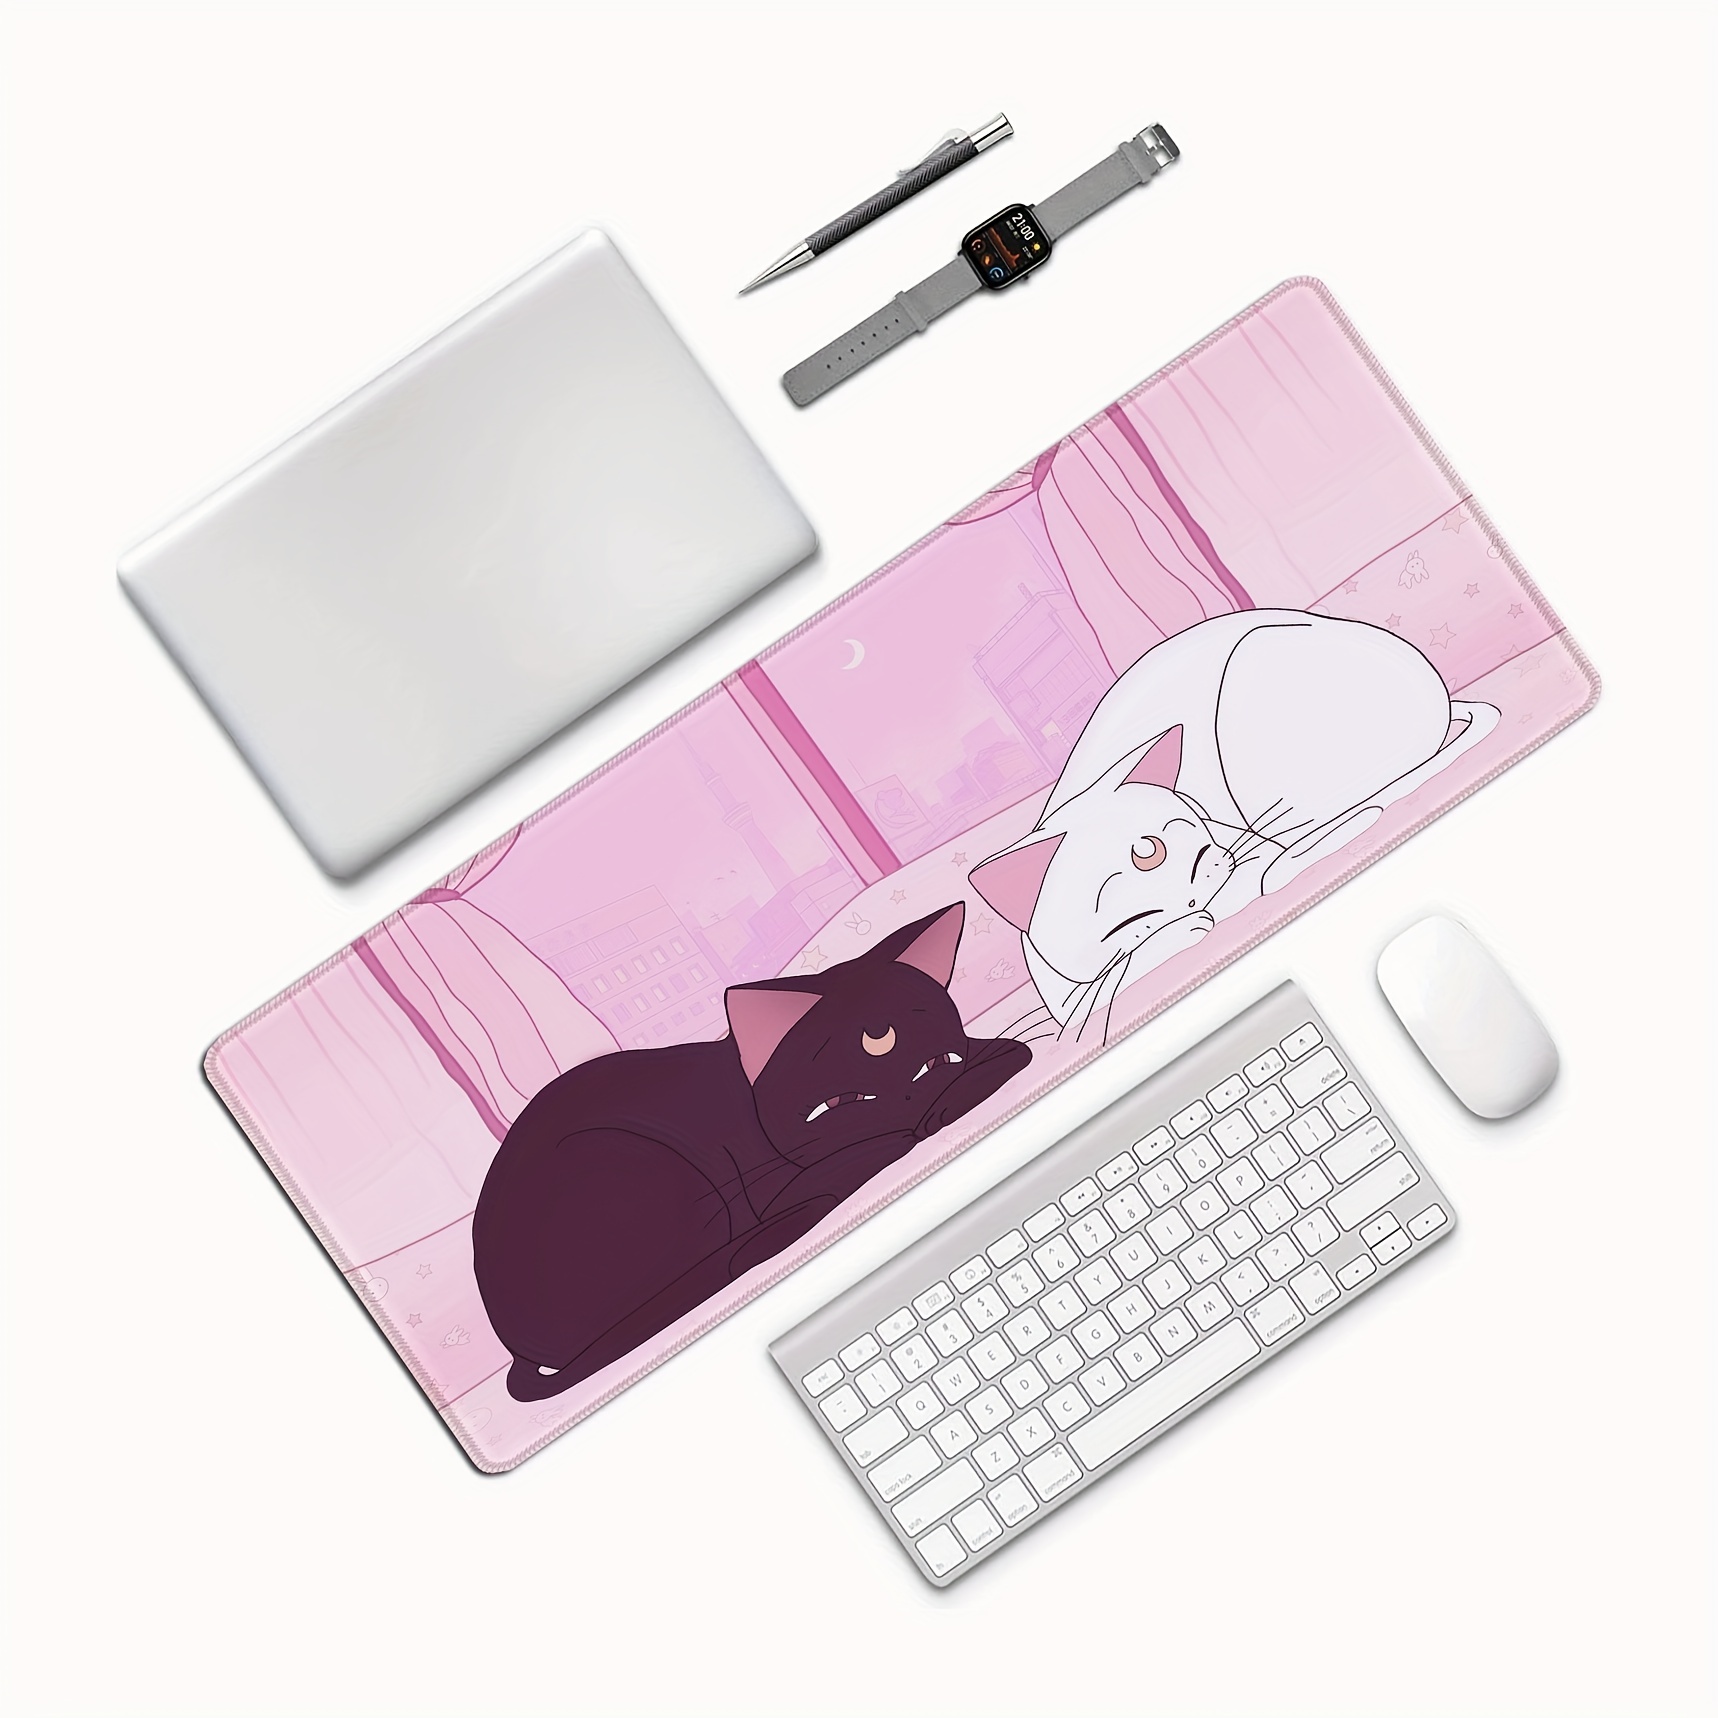 Keyboard and Mouse Pad